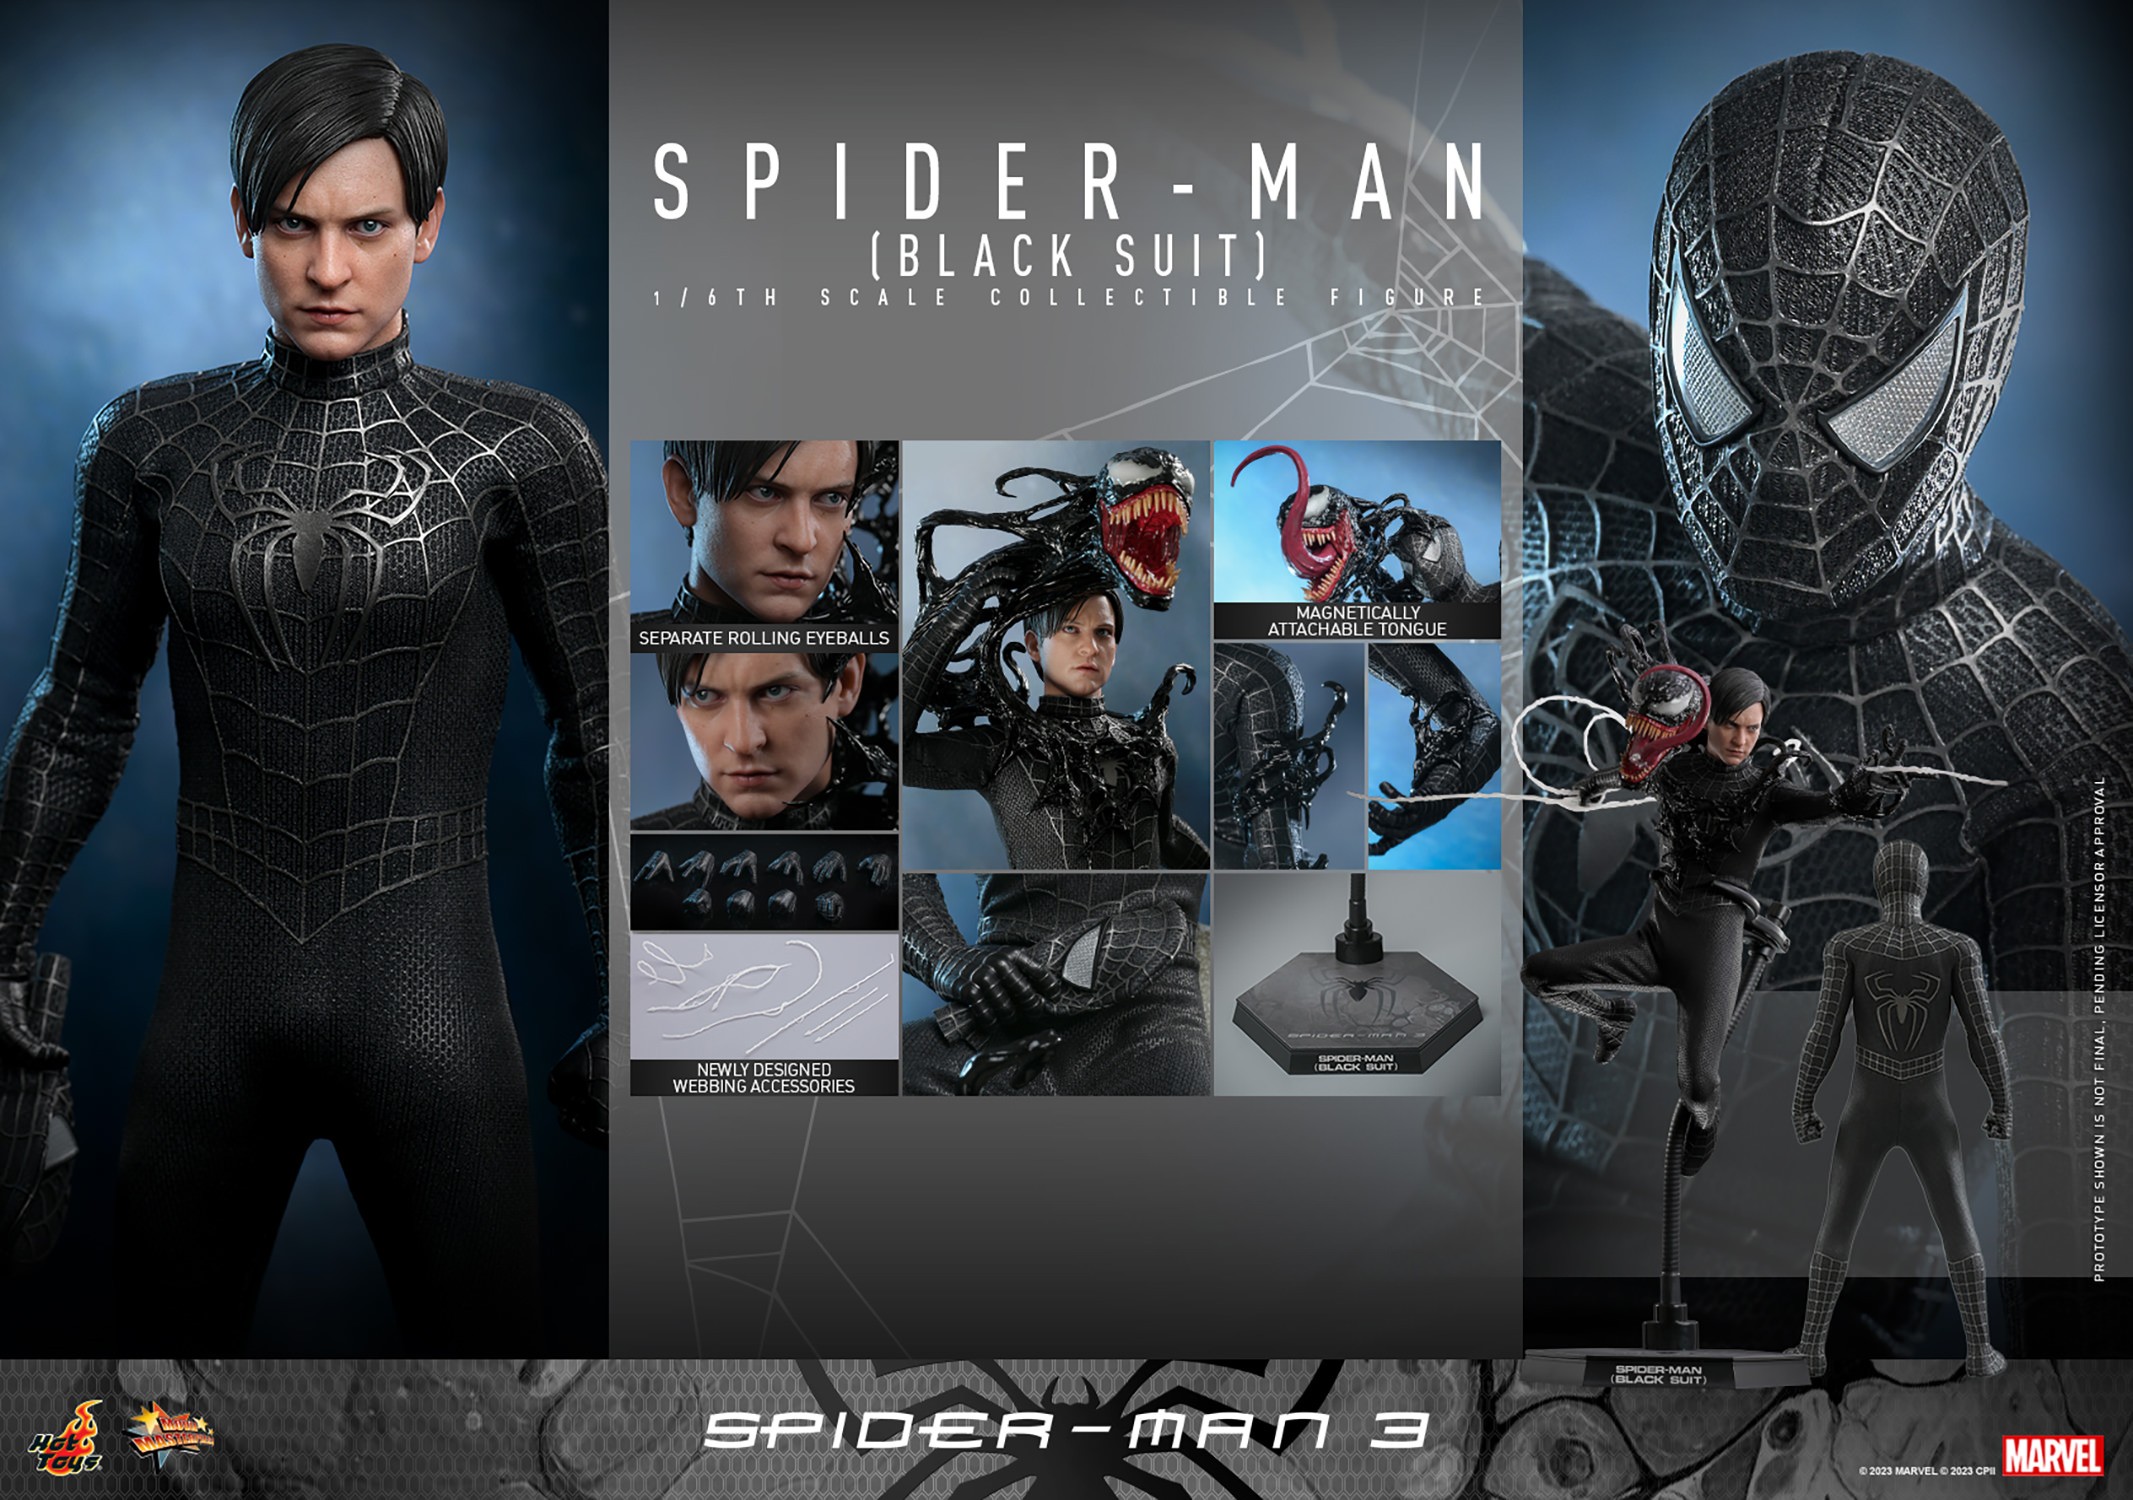 Spider-Man (Black Suit) Collector Edition (Prototype Shown) View 13